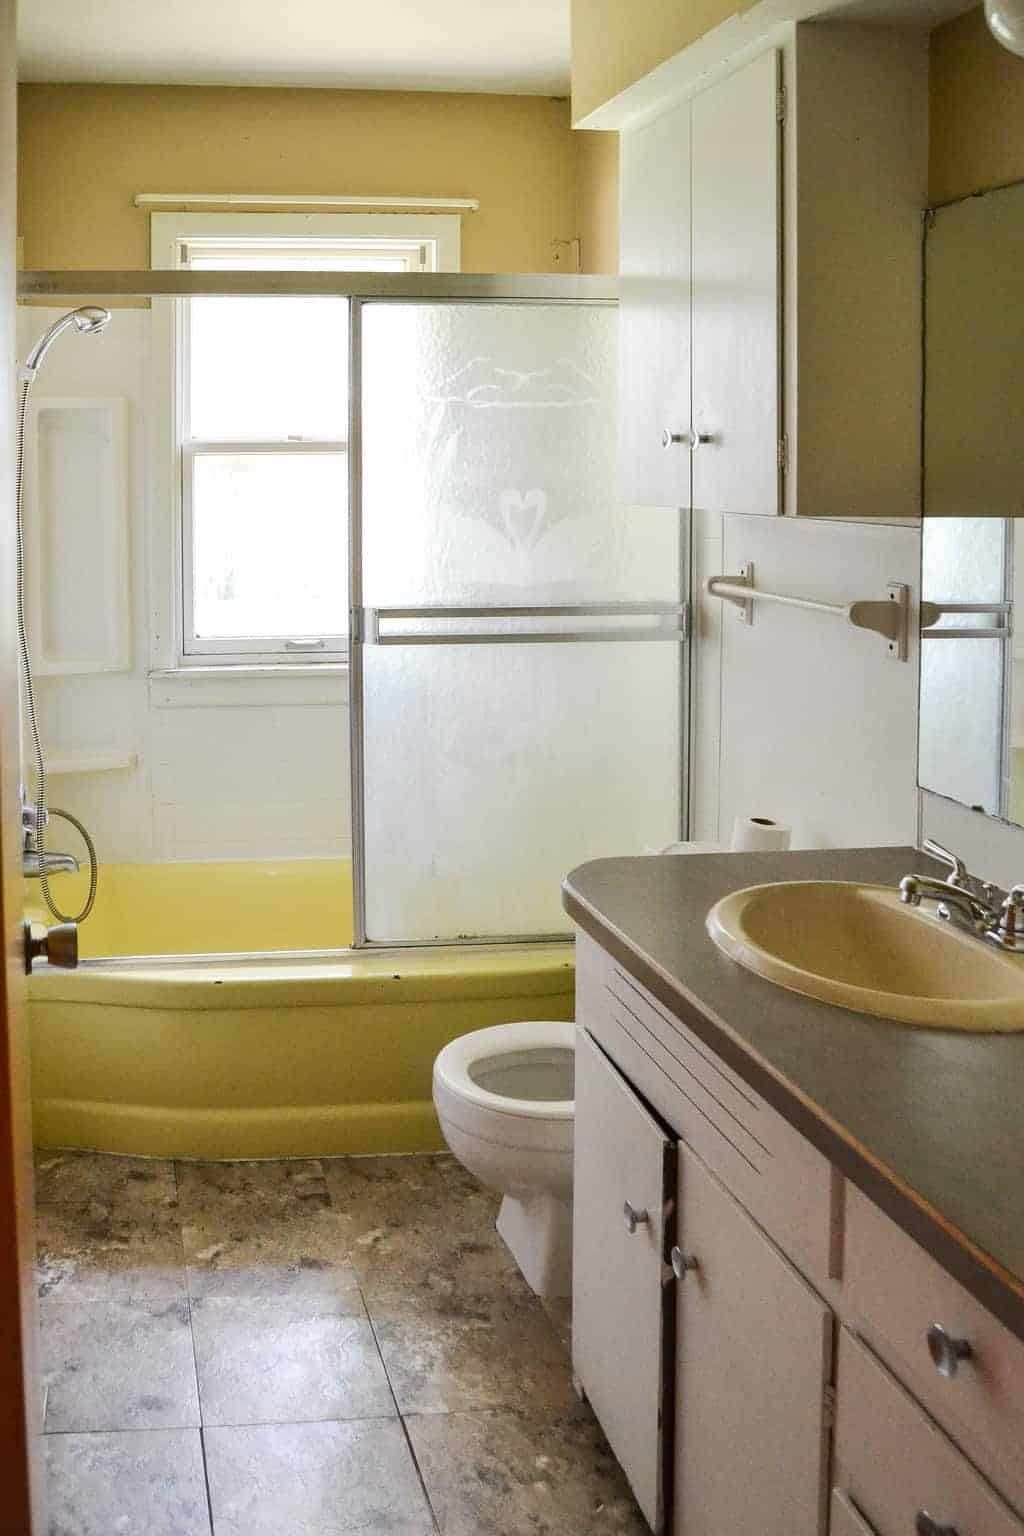 Bathroom Tub Paint
 How To Paint A Bathtub Easily & Inexpensively My